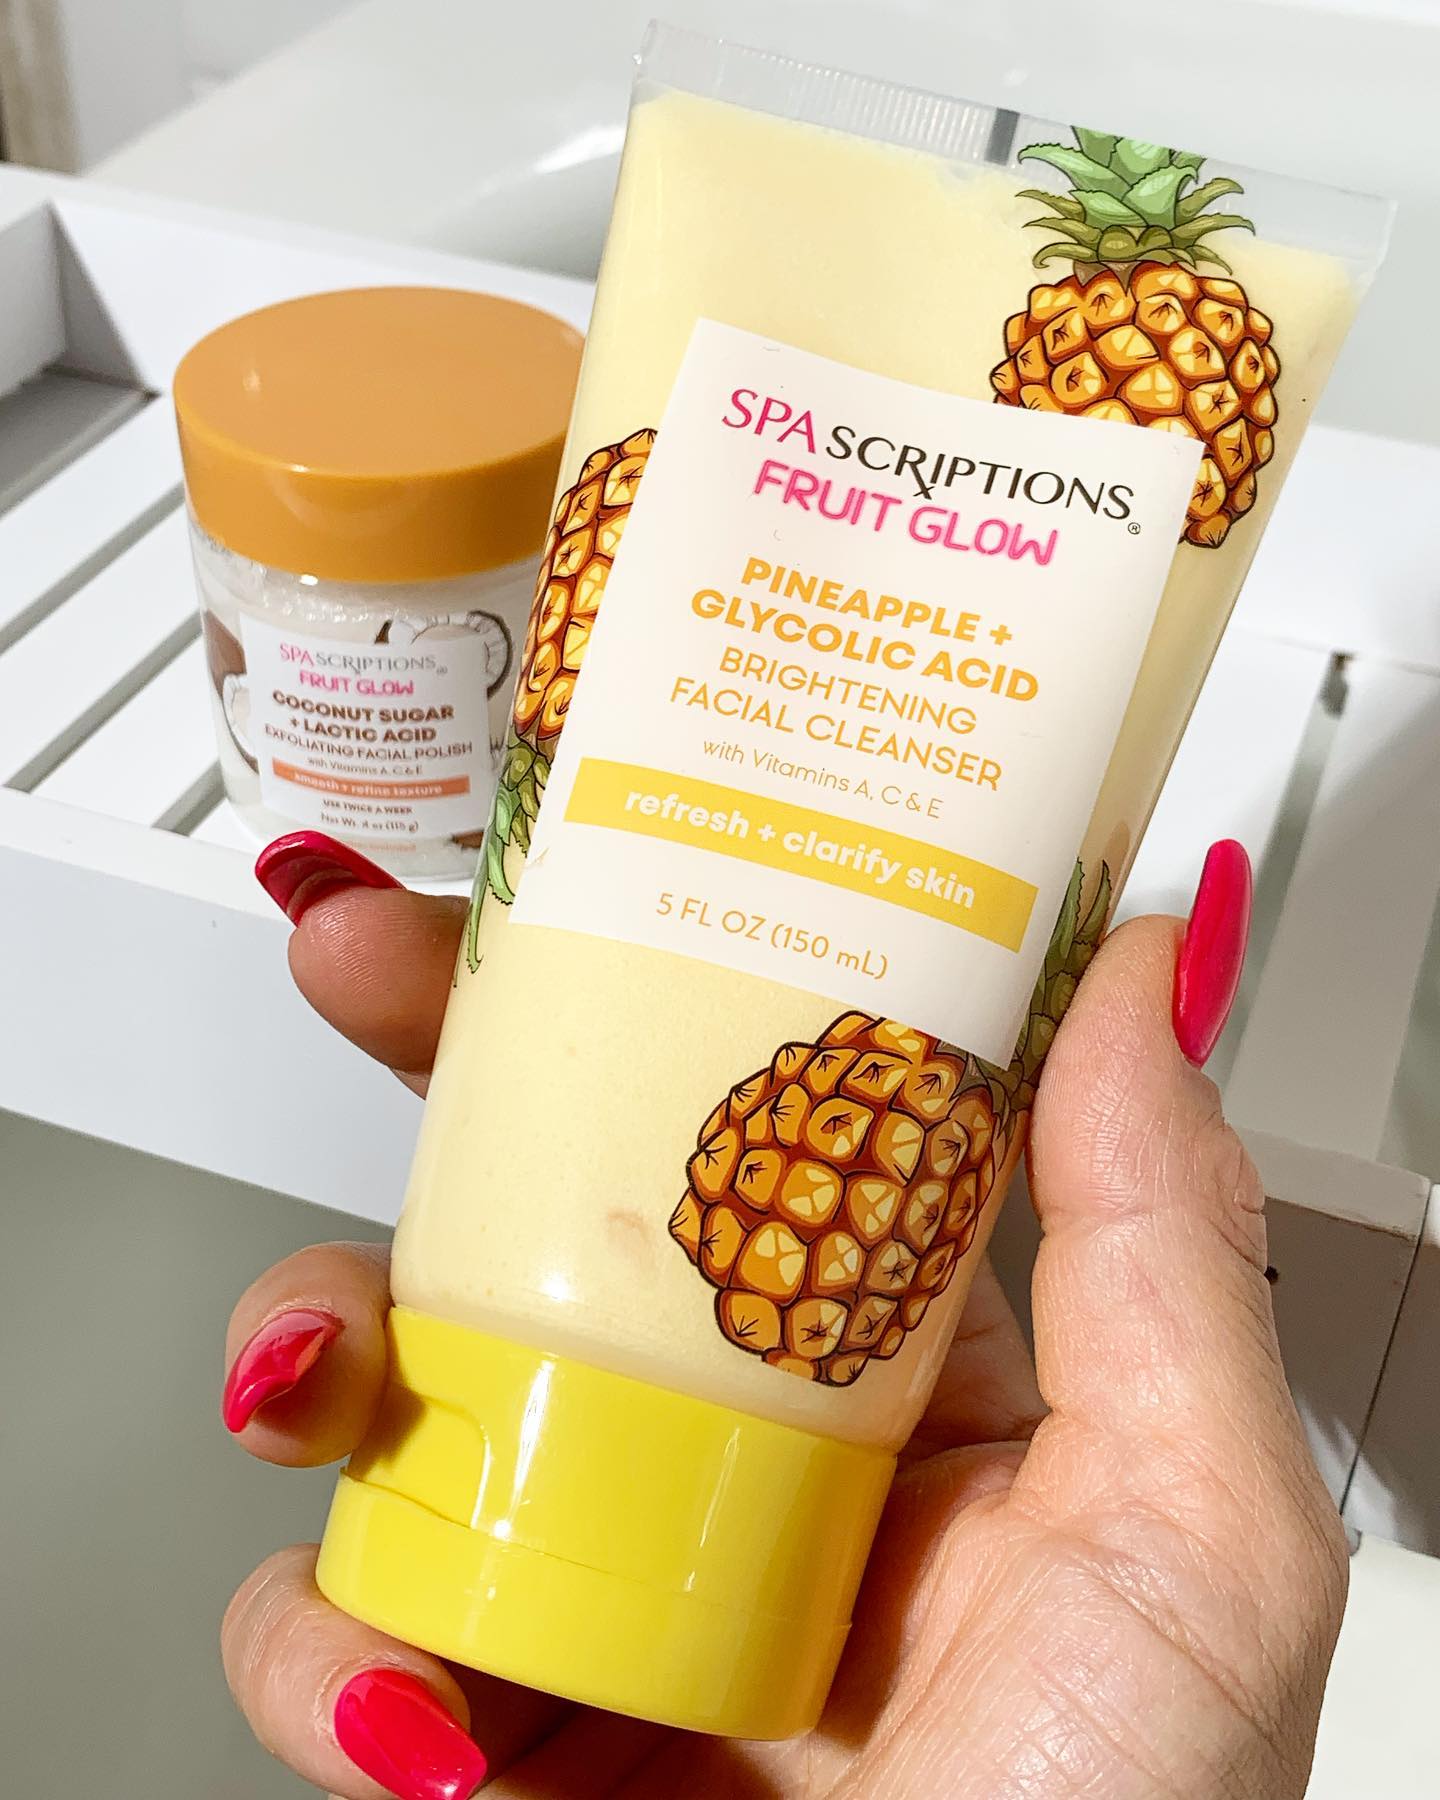 Fruit Glow Pineapple + Glycolic Acid Brightening Facial Cleanser